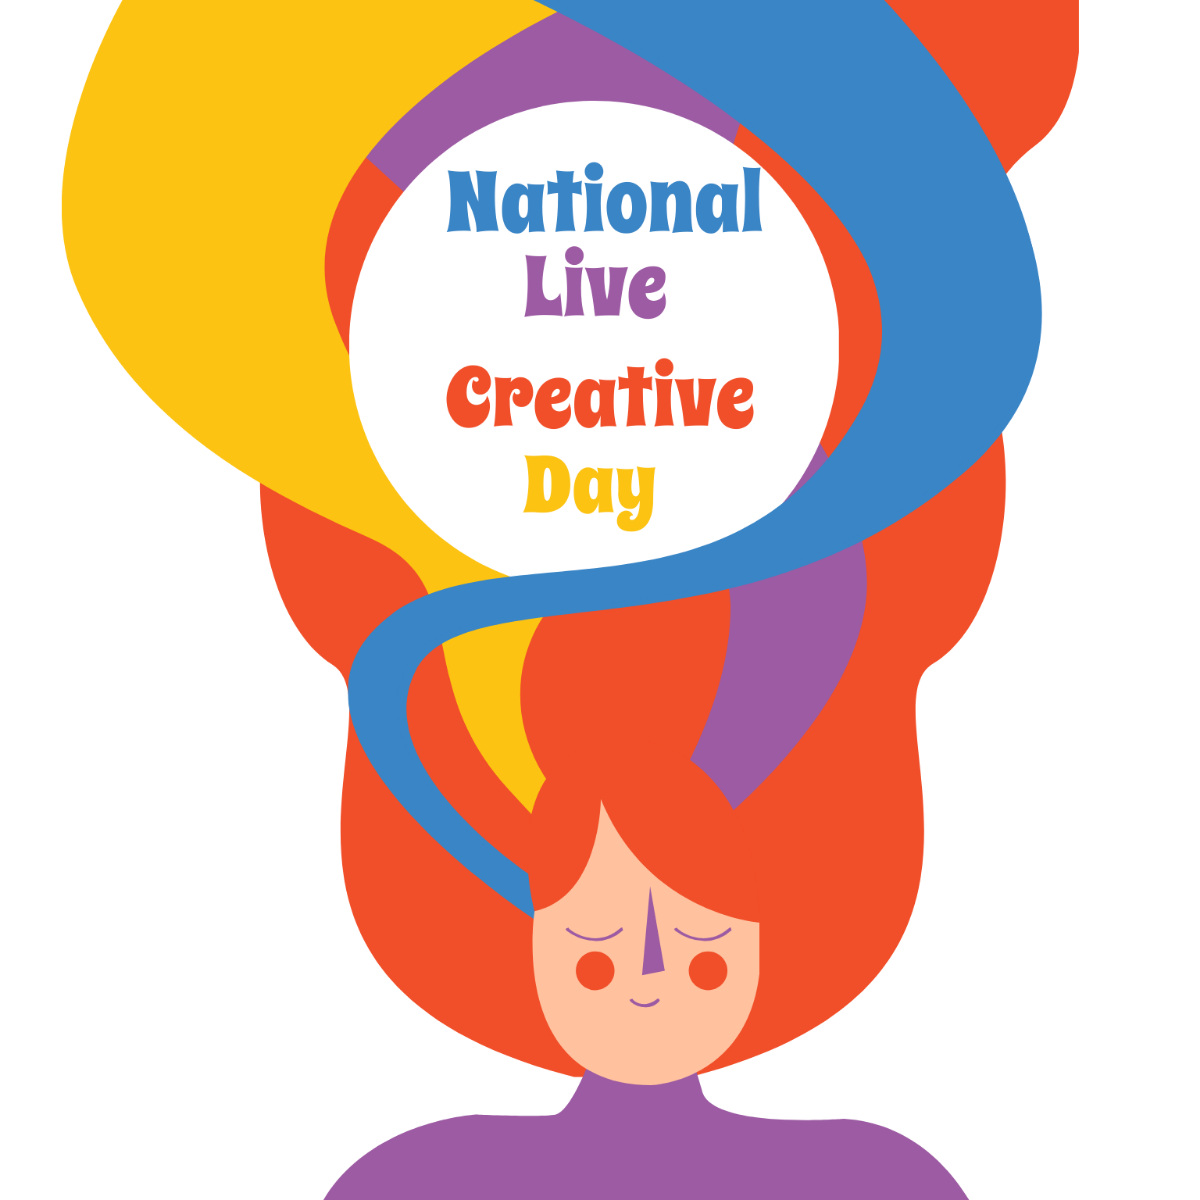 Free National Live Creative Day Cartoon Vector Template